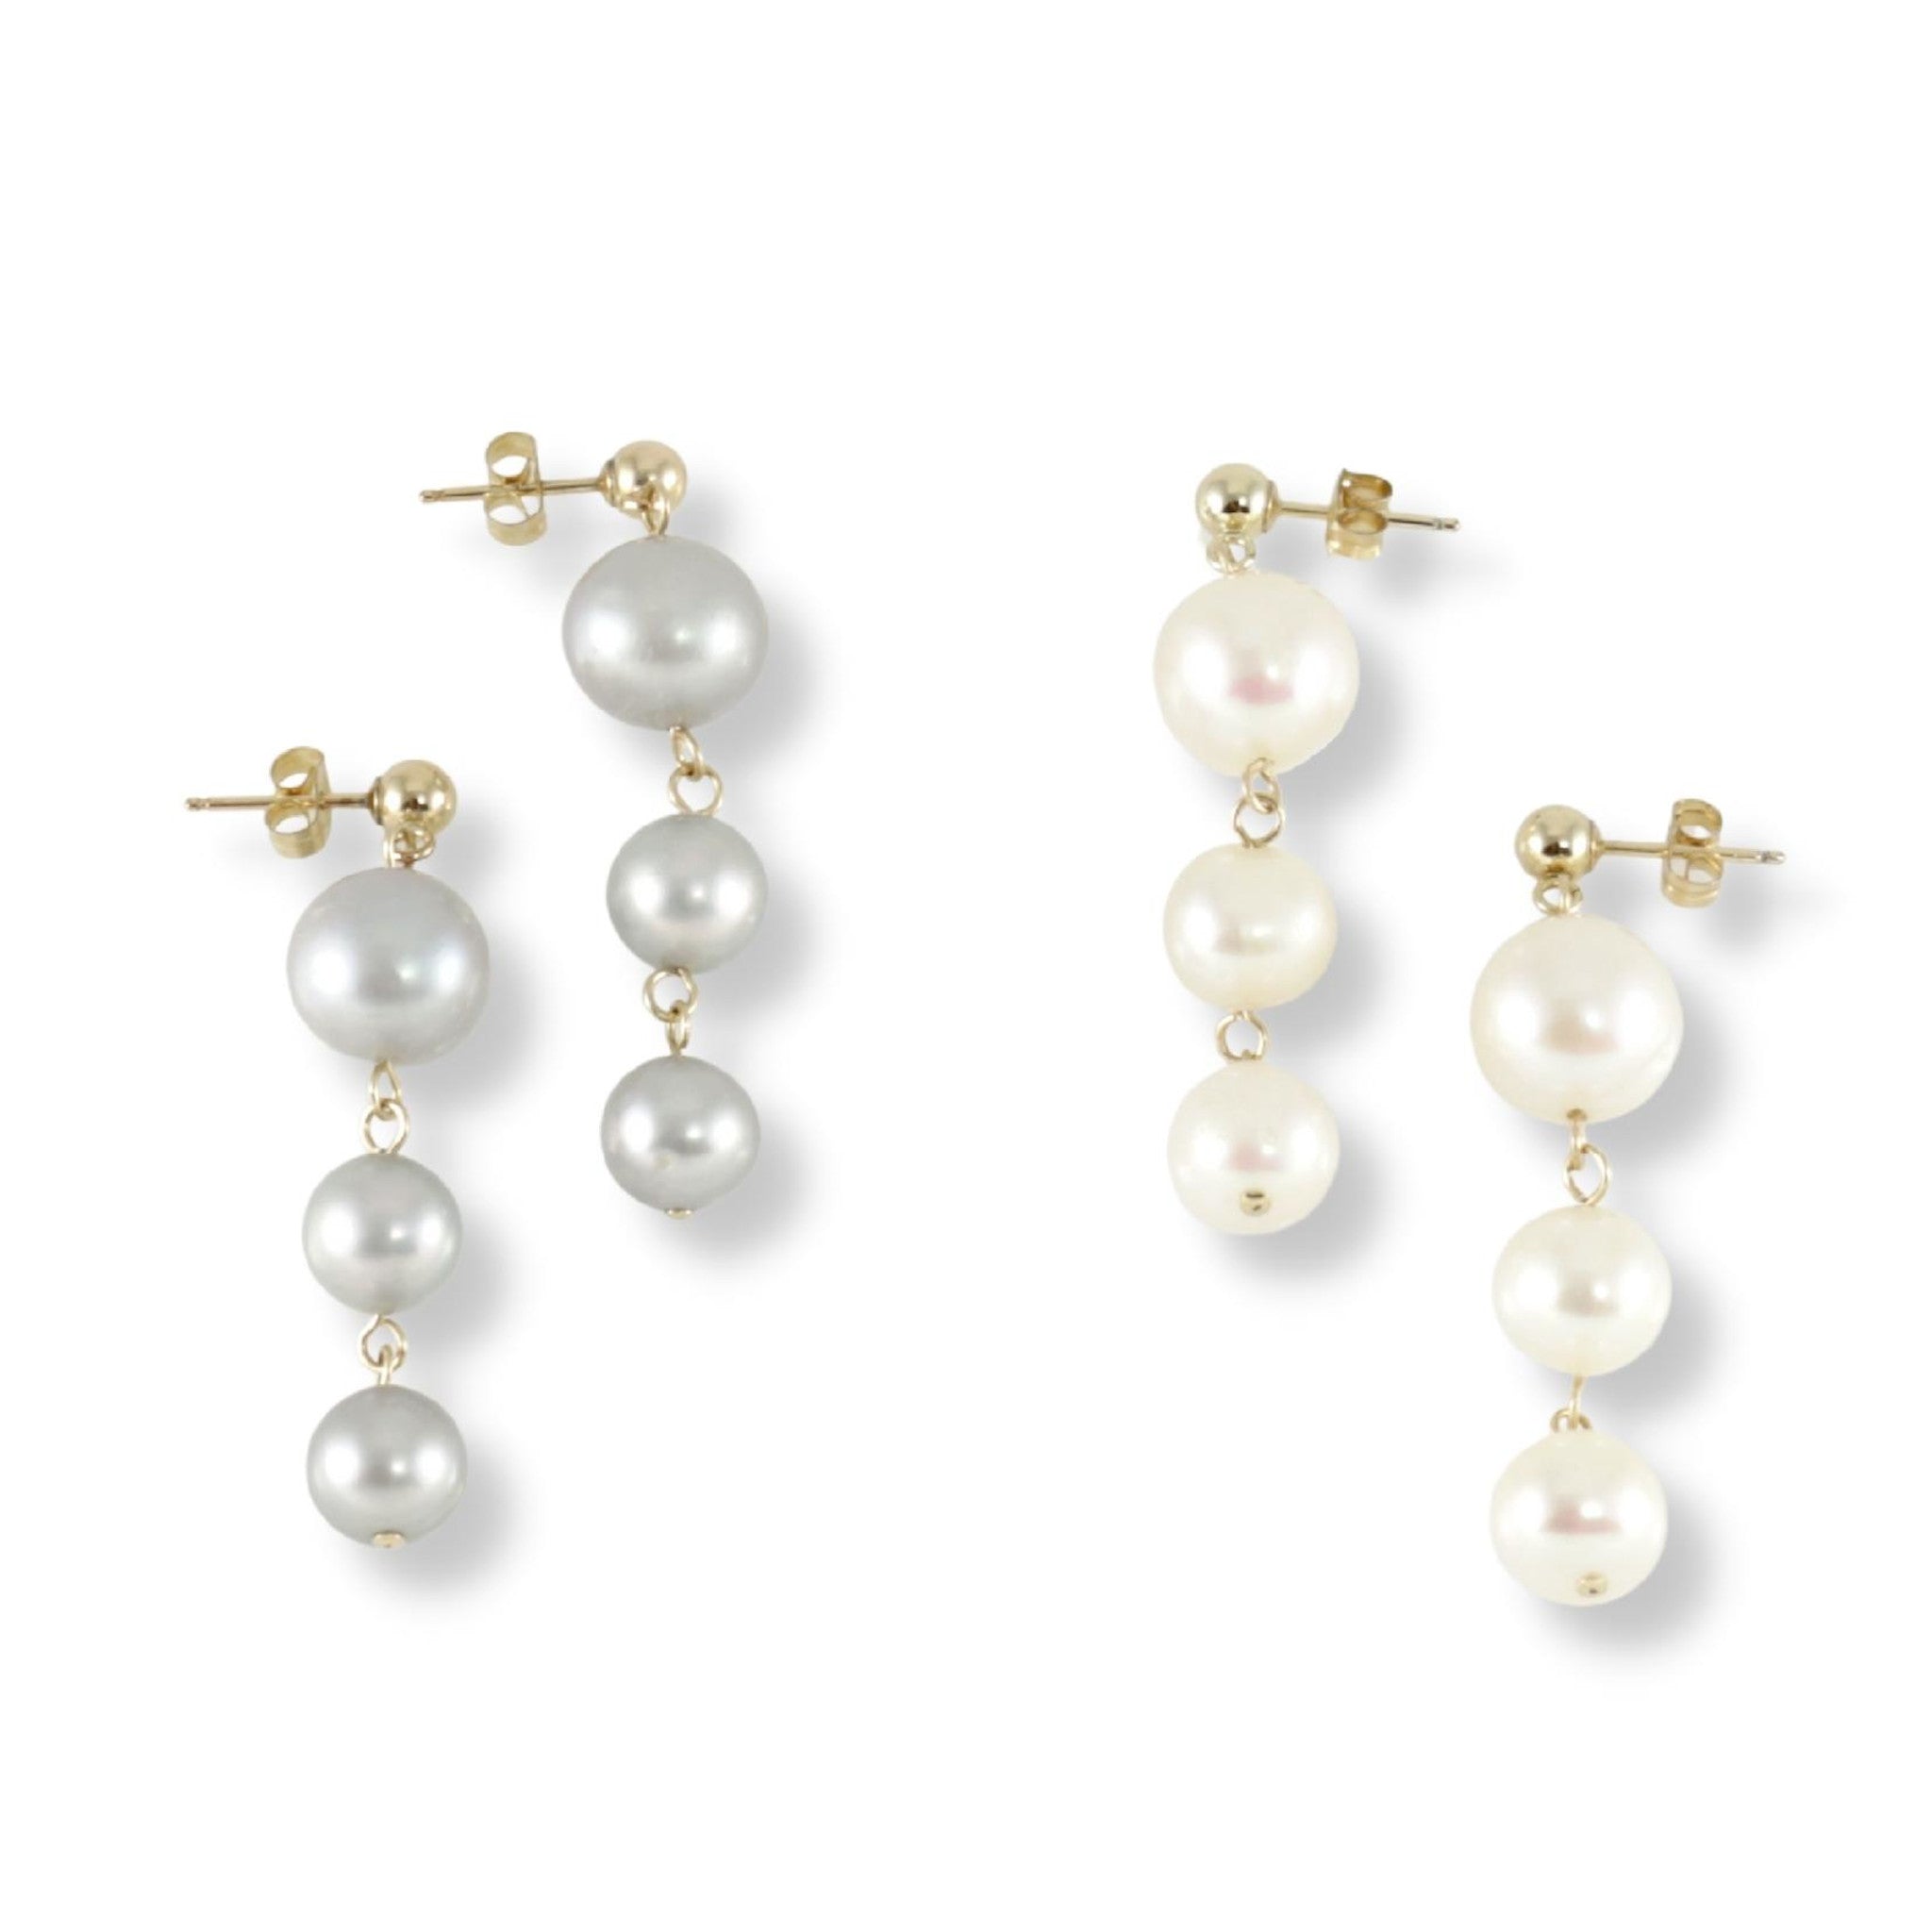 Freshwater three pearl pendant dangle earrings with 14 karat gold filled links and studs. Earrings come in either grey or white pearls.